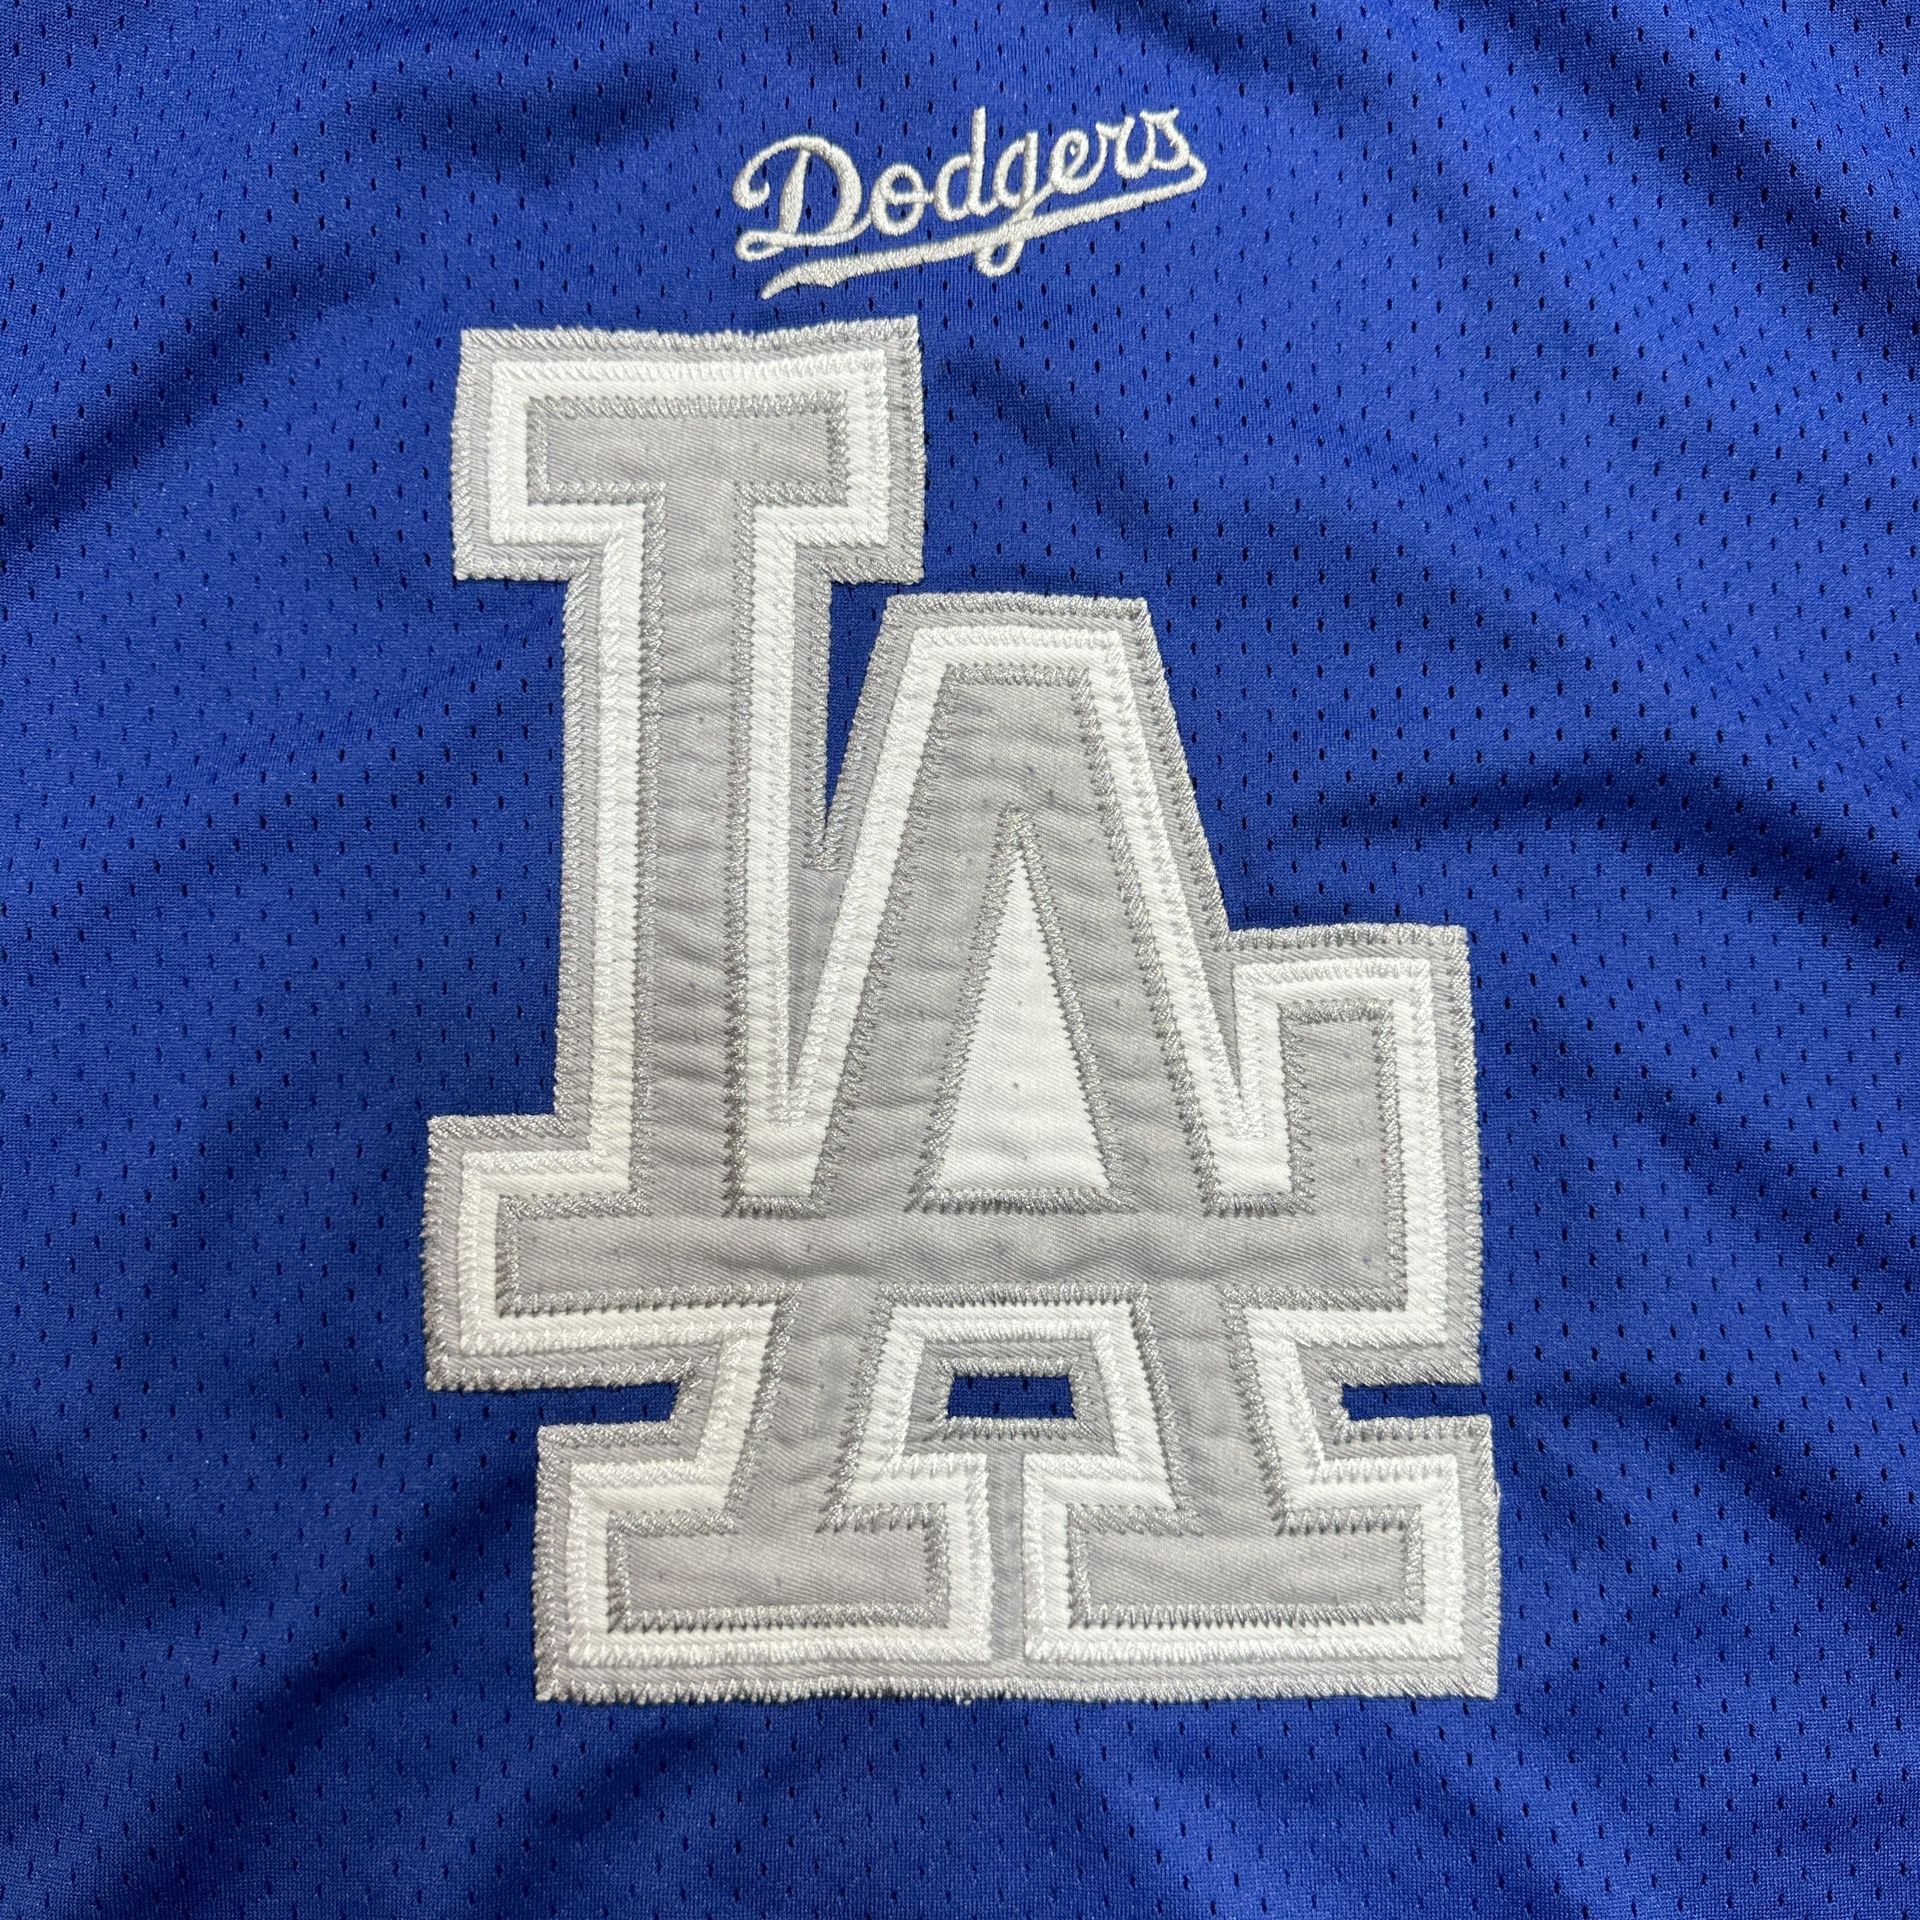 MLB Nike Los Angeles Dodgers White Gold 2022 All Star Jersey Blank Mens  Size 3x for Sale in City Of Industry, CA - OfferUp